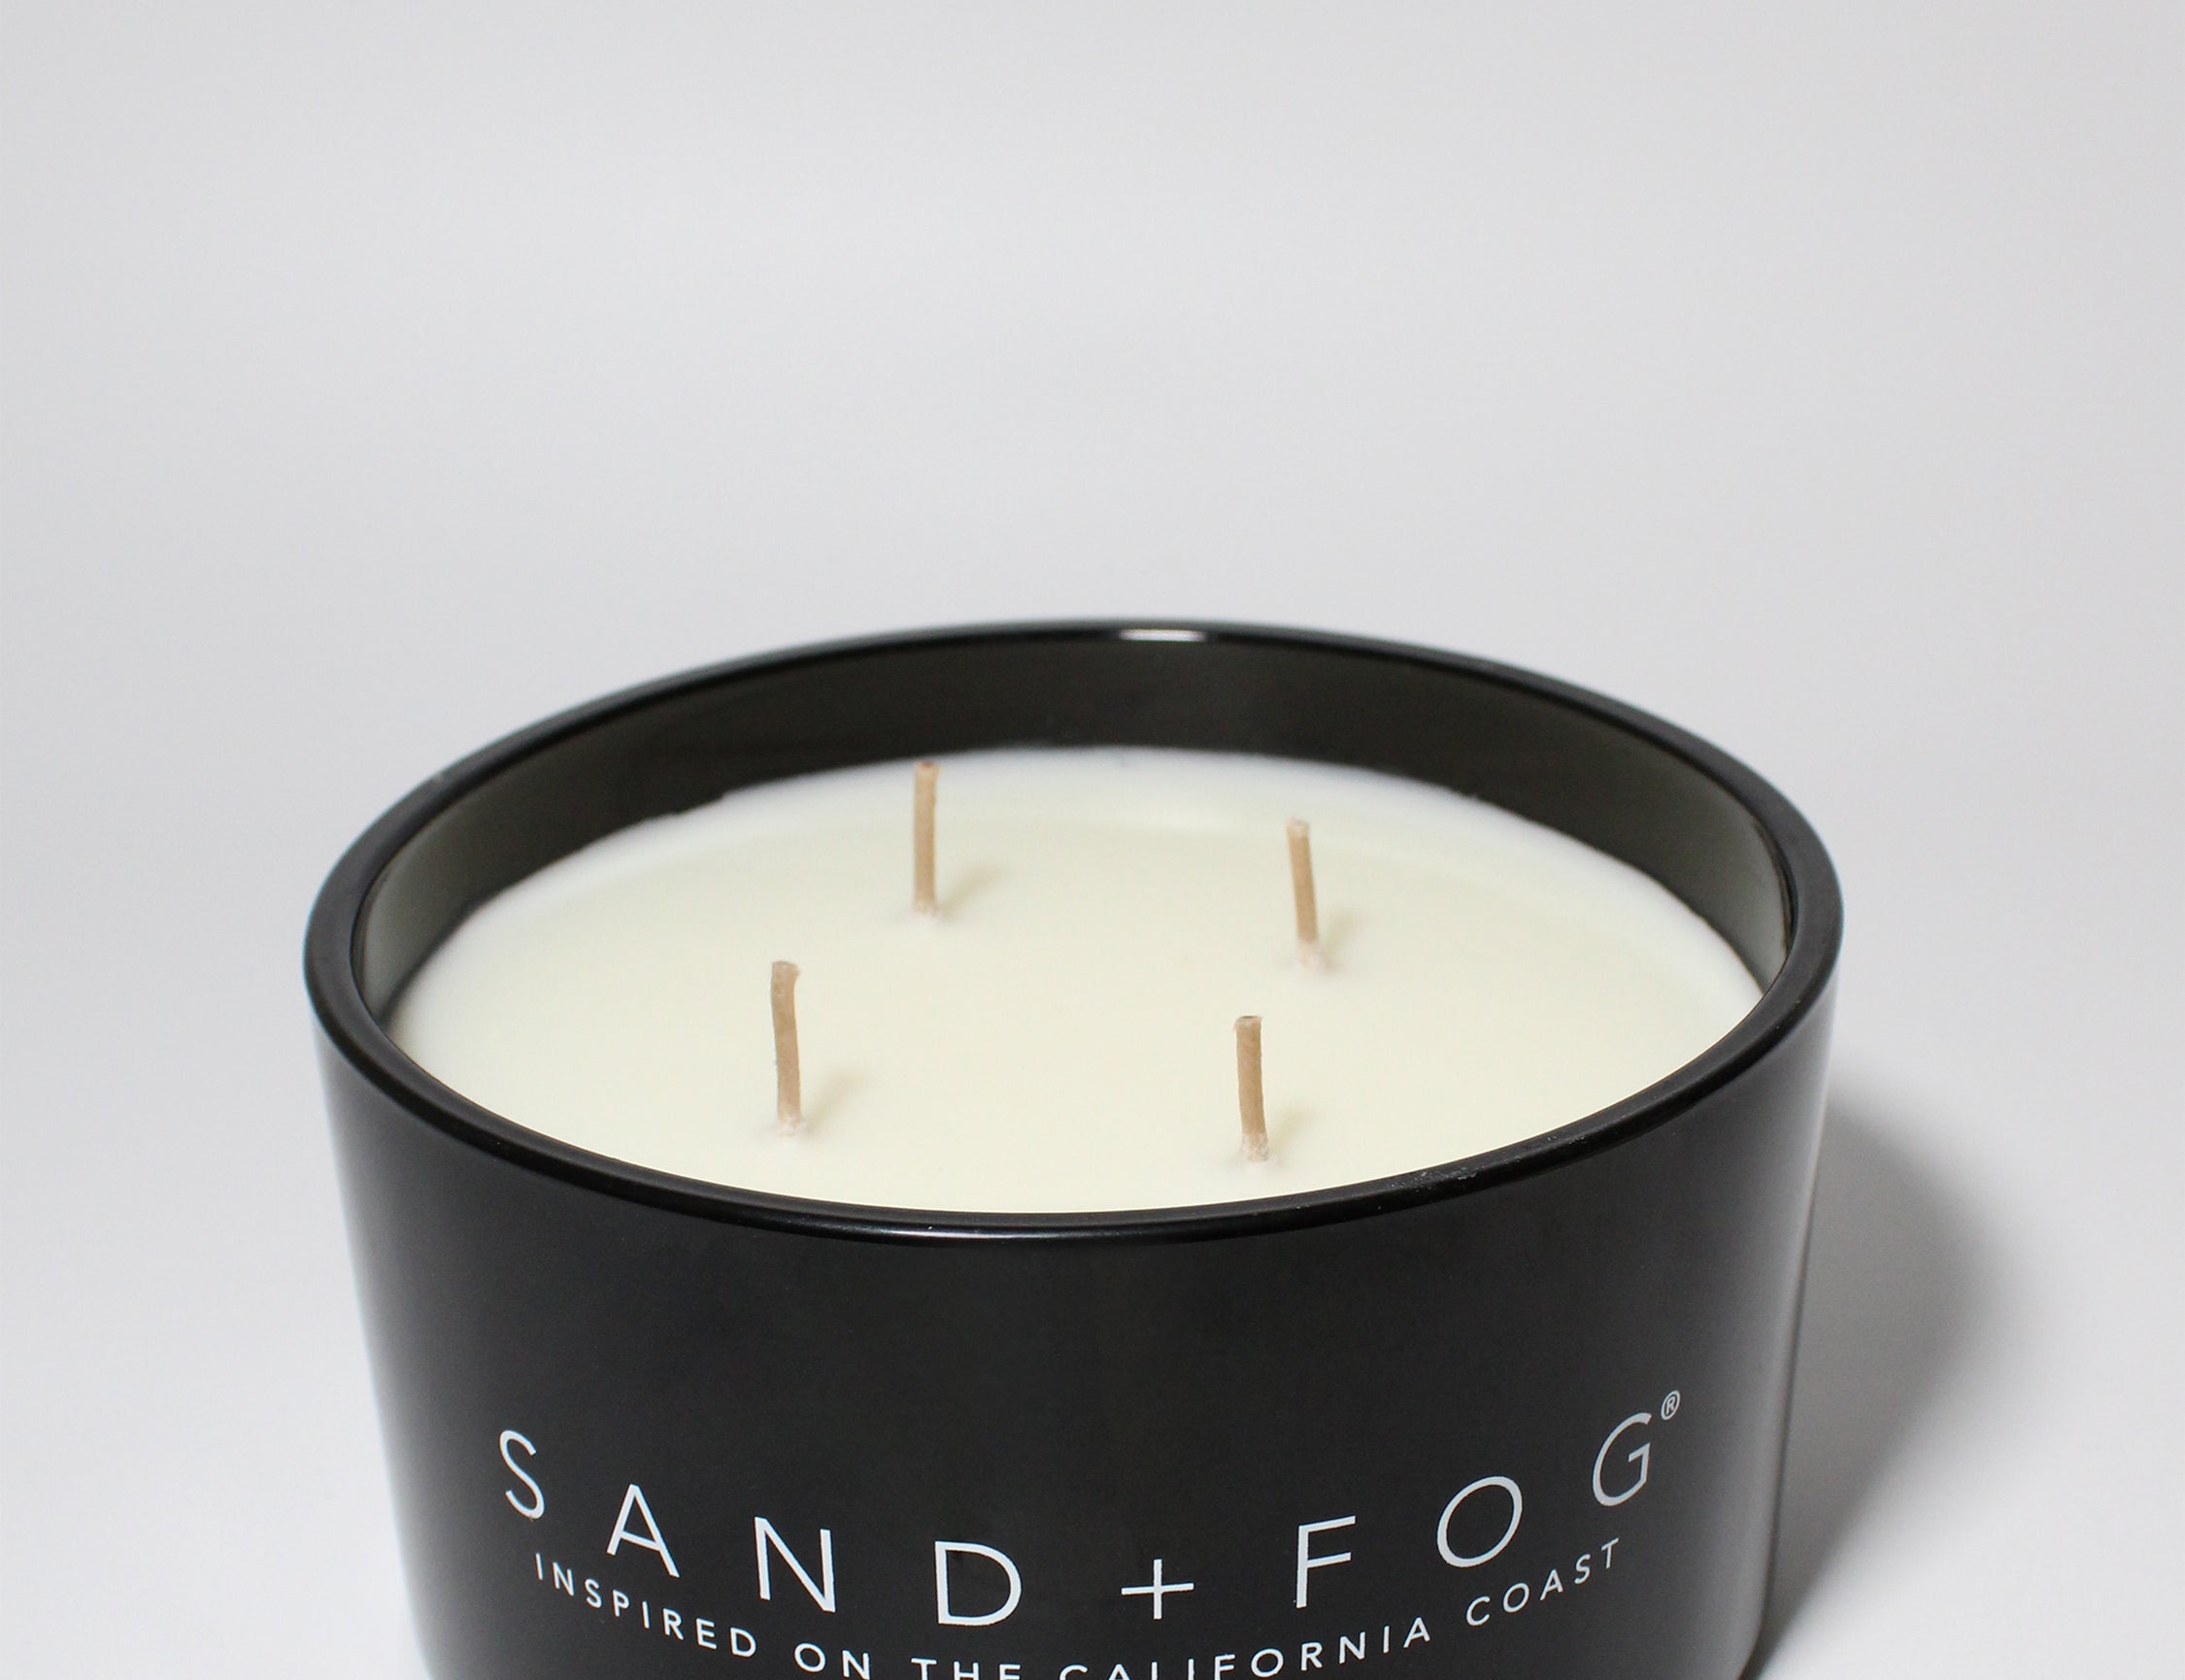 Vanilla Tobacco 23 oz scented candle Black vessel with Sand+Fog wood lid